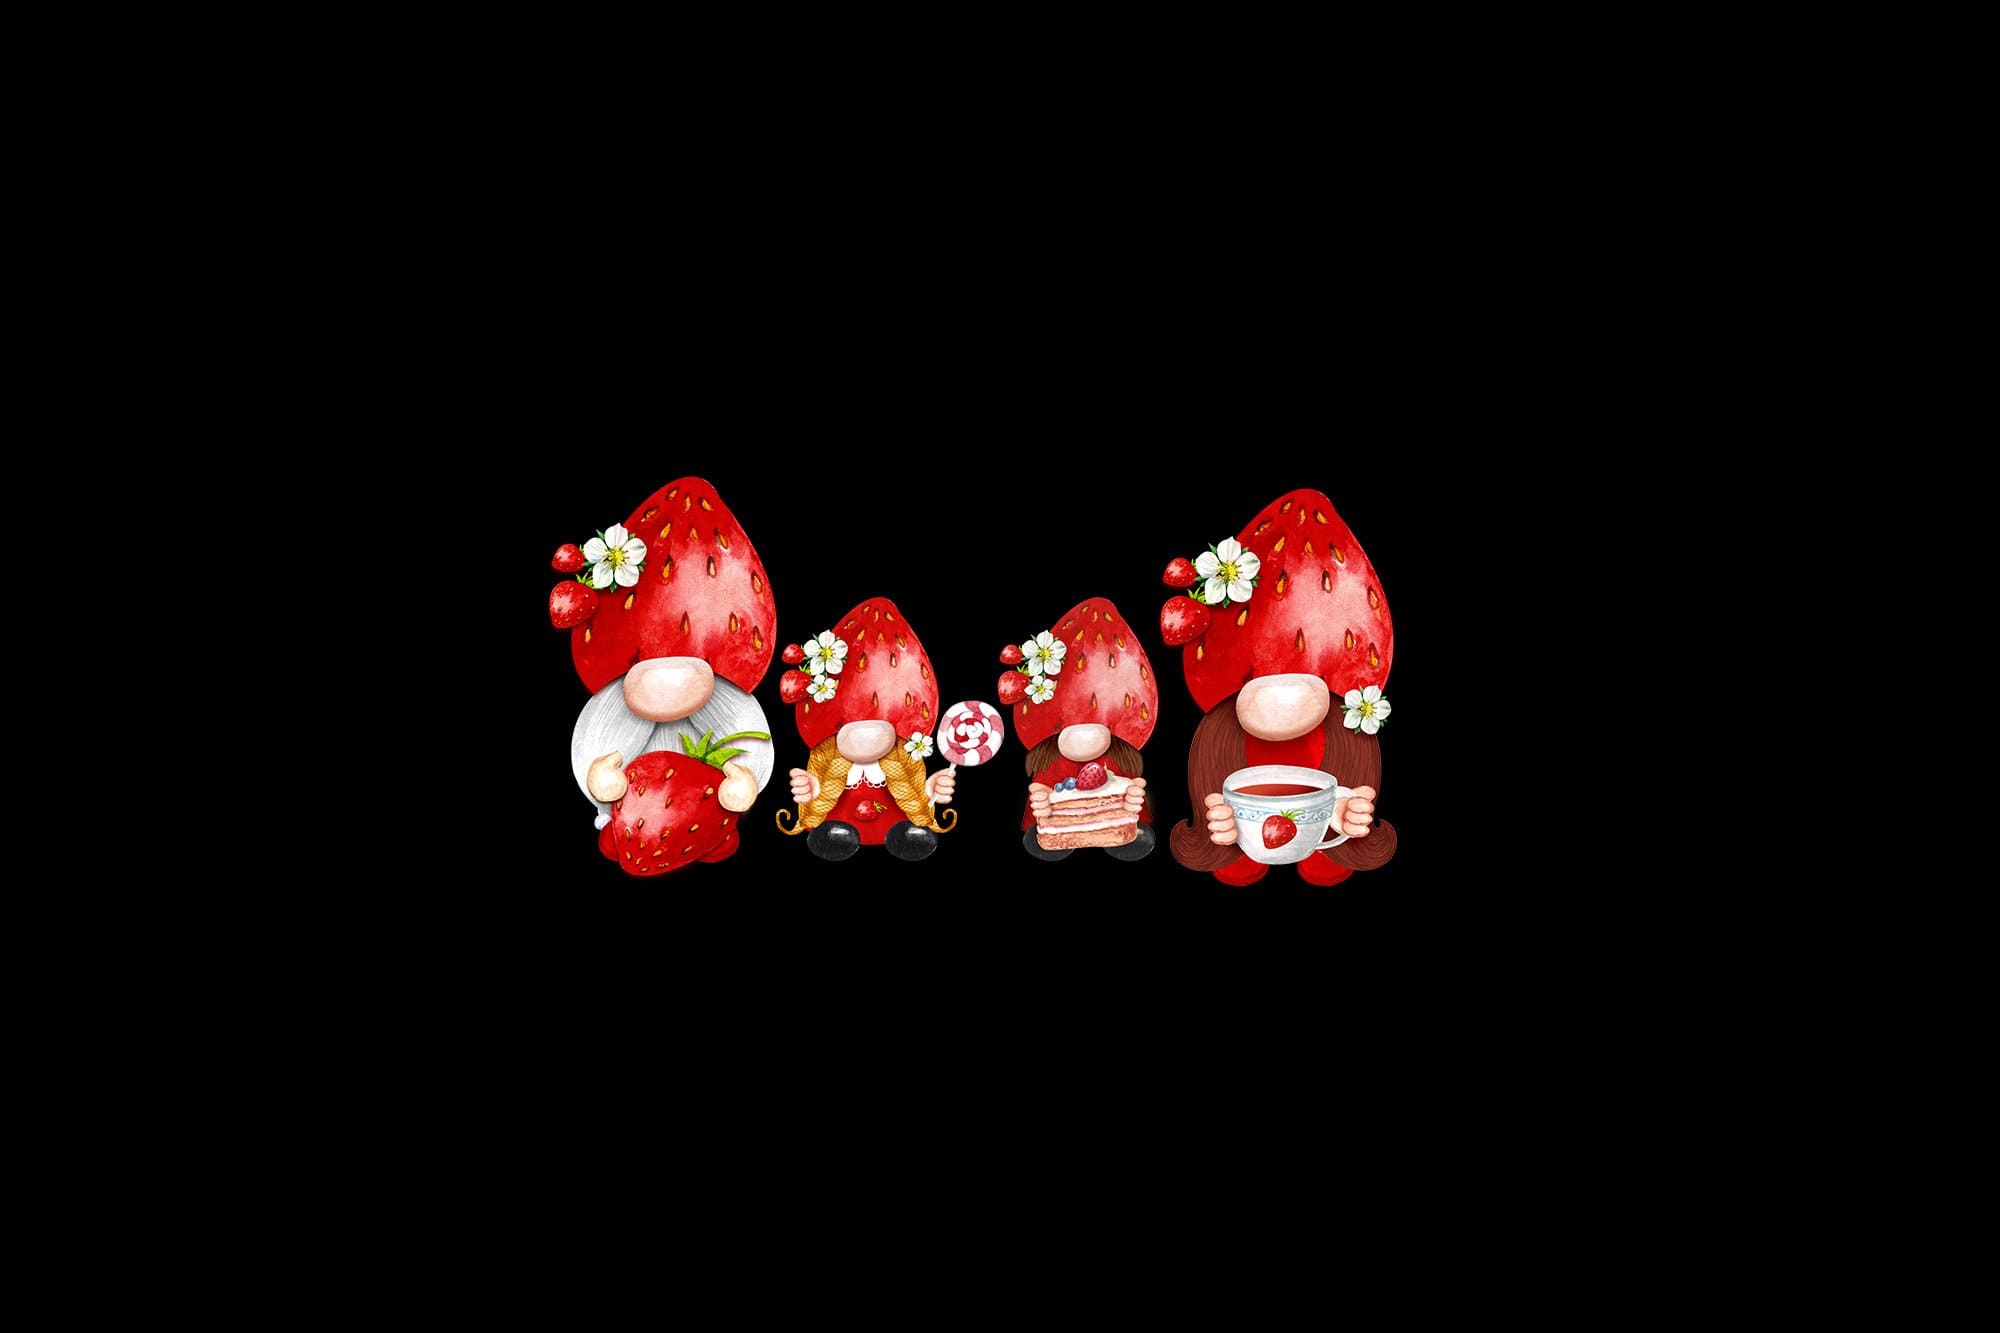 Image of a family of gnomes wearing strawberry hats on the black background.